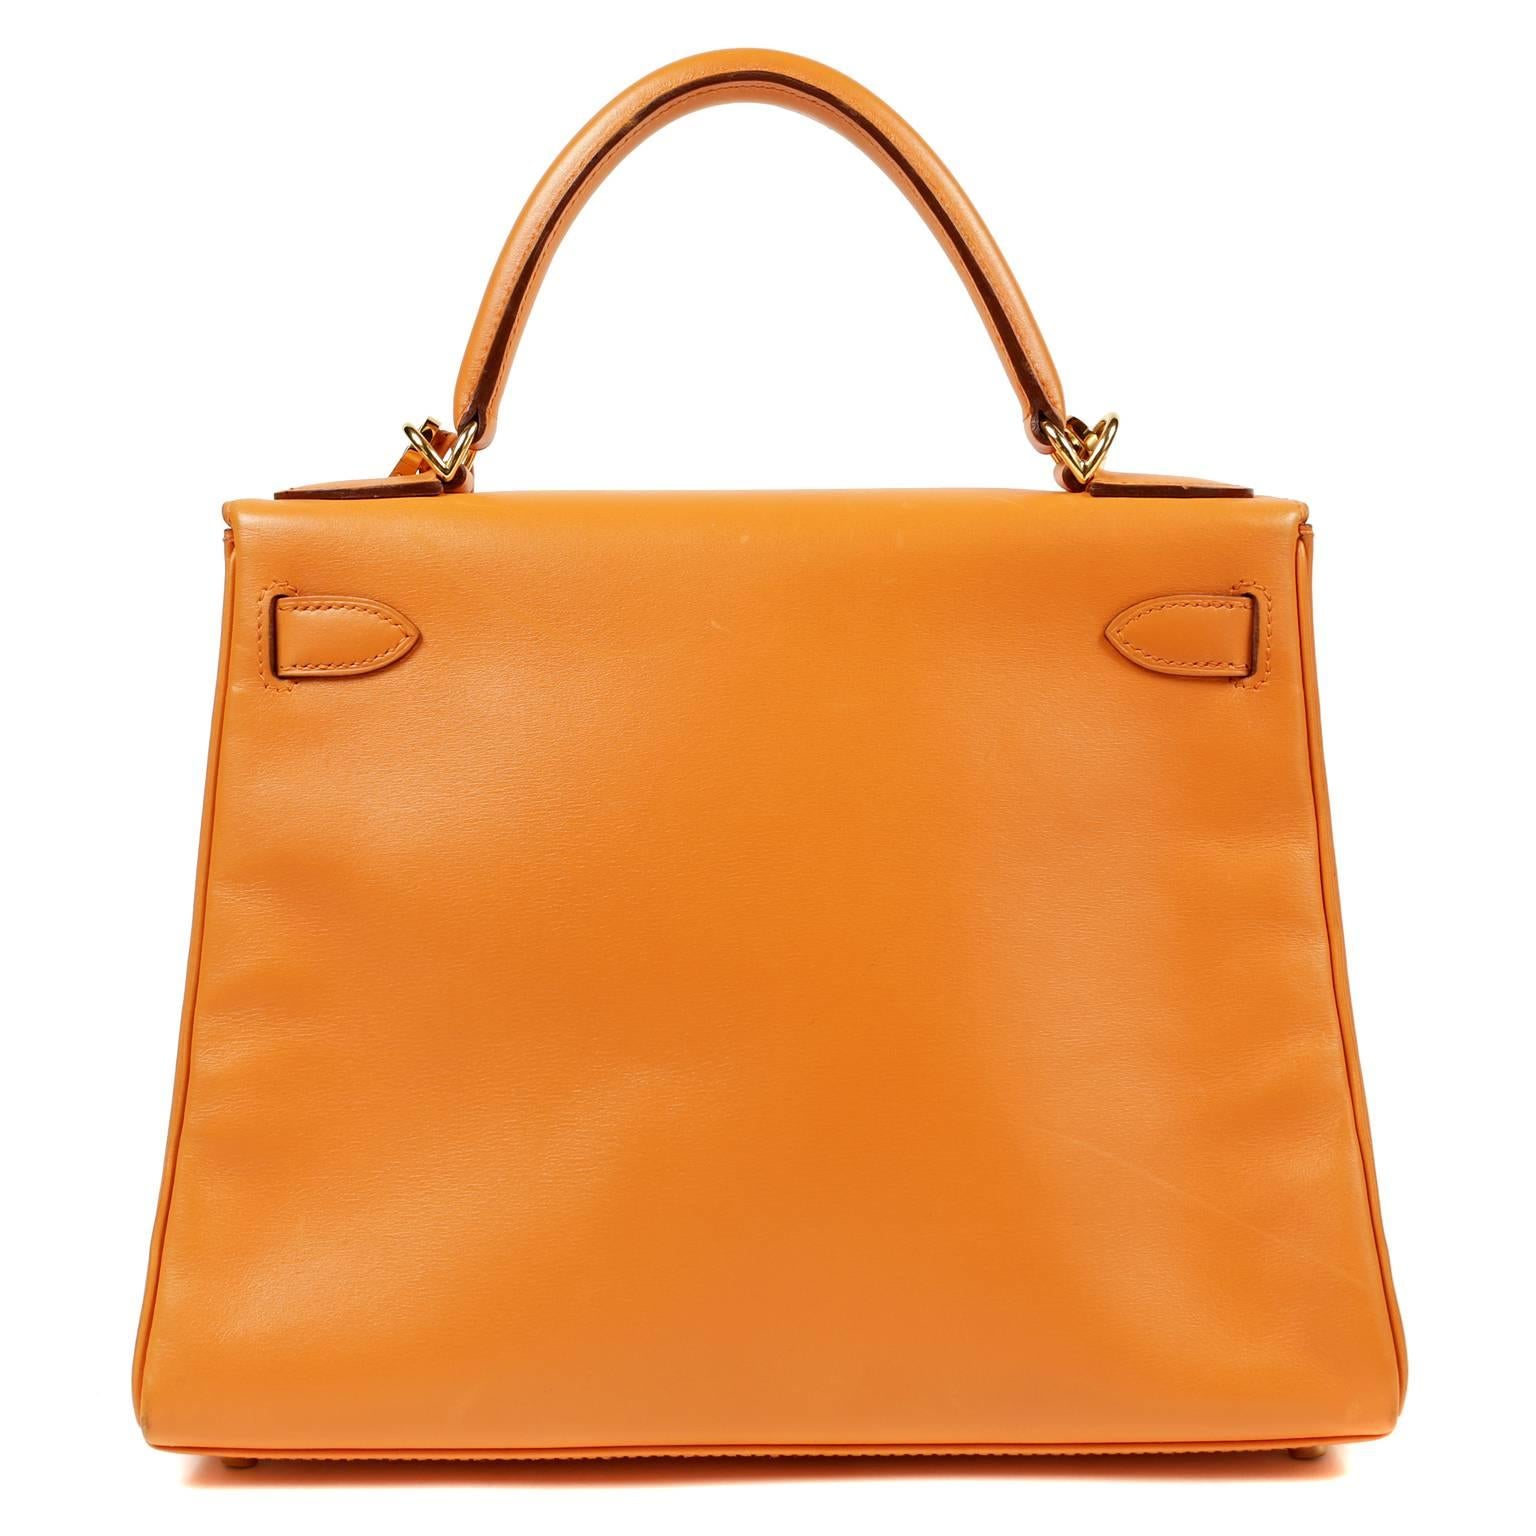 Hermès  Orange Box Calf 28 cm Kelly- Nearly Pristine with slight signs of prior ownership.
  Hermès bags are considered the ultimate luxury item worldwide.  Each piece is handcrafted with waitlists that can exceed a year or more.  The streamlined